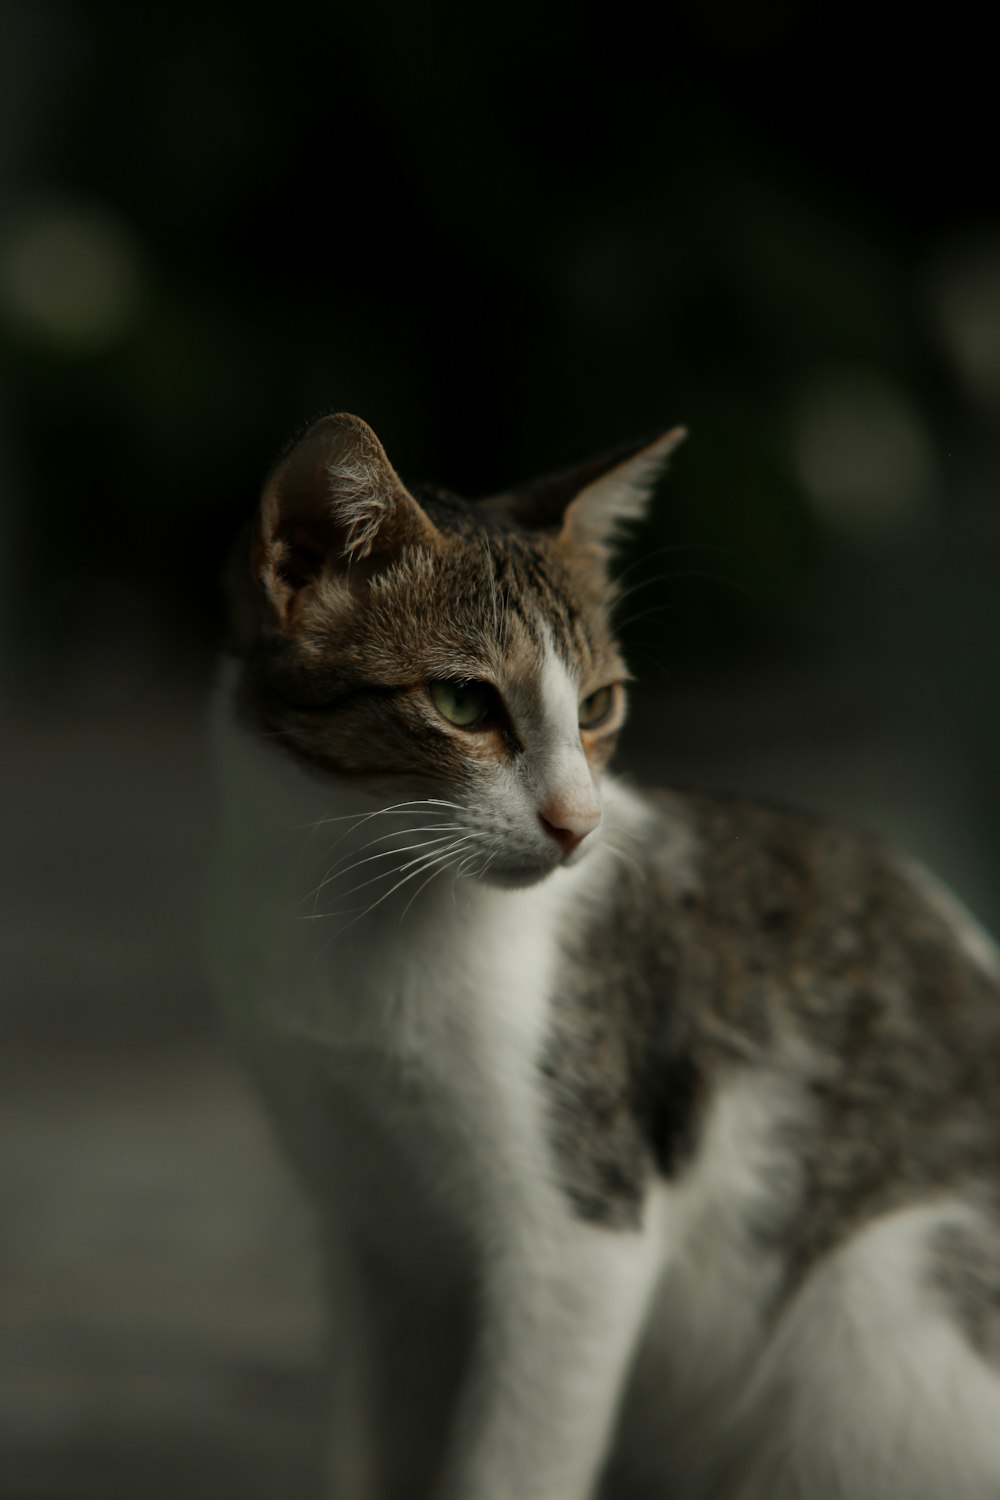 a close up of a cat with a blurry background